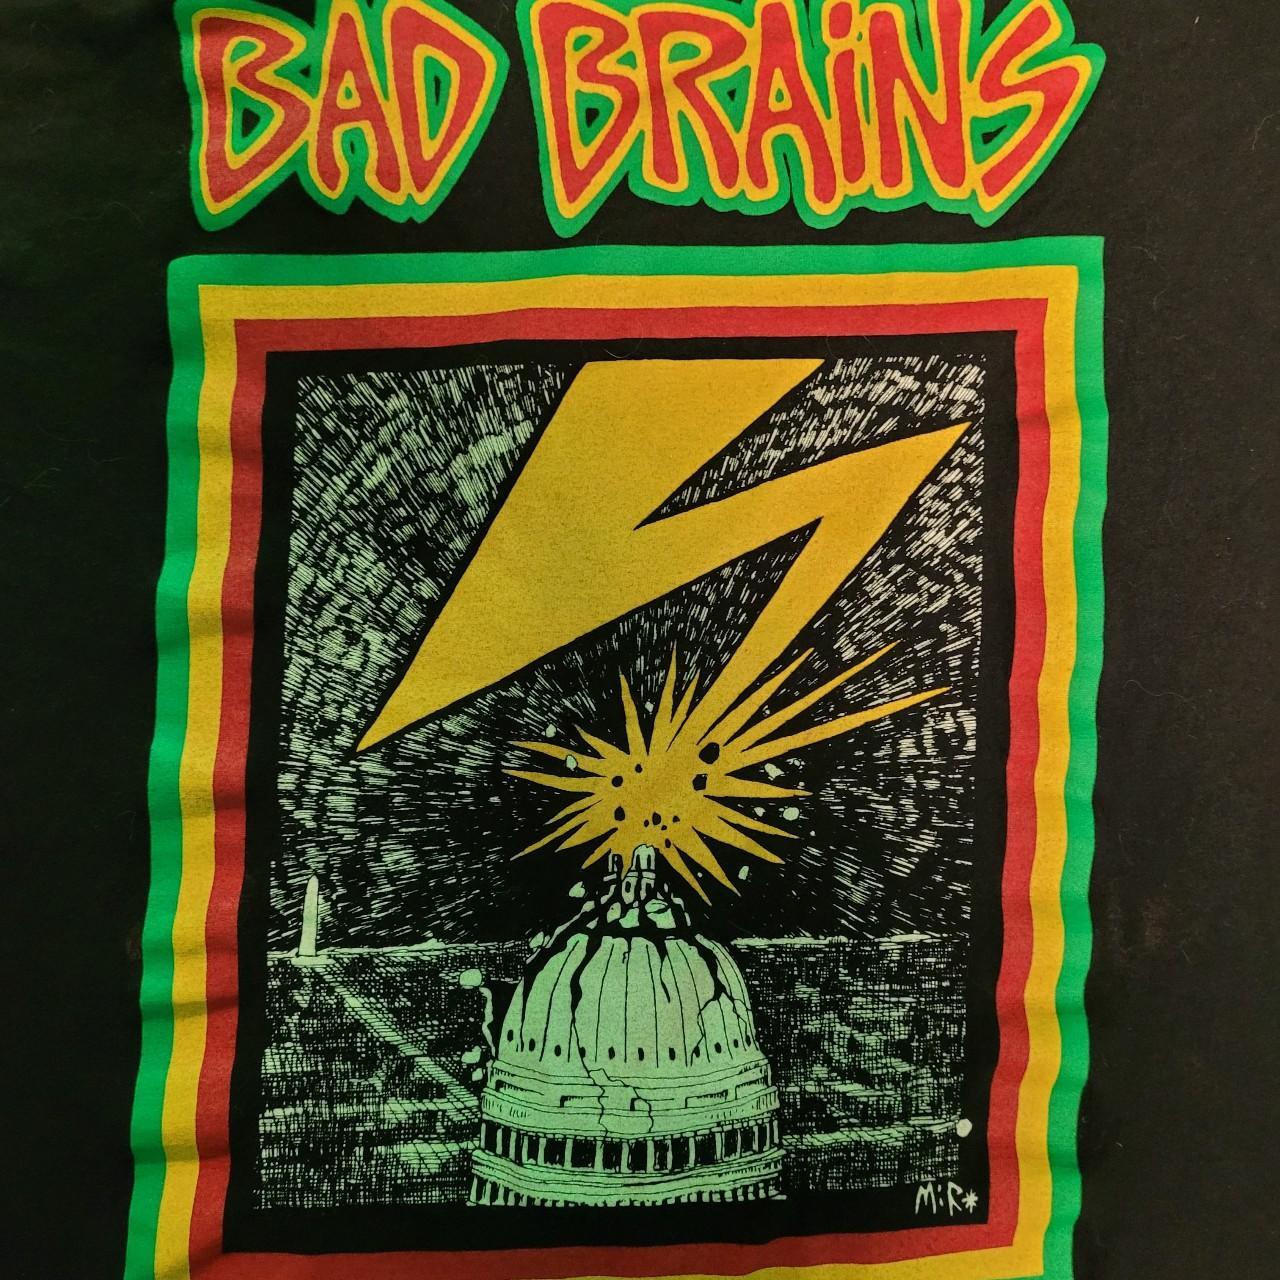 Bad Brains banned in dc logo punk band tee. size - Depop